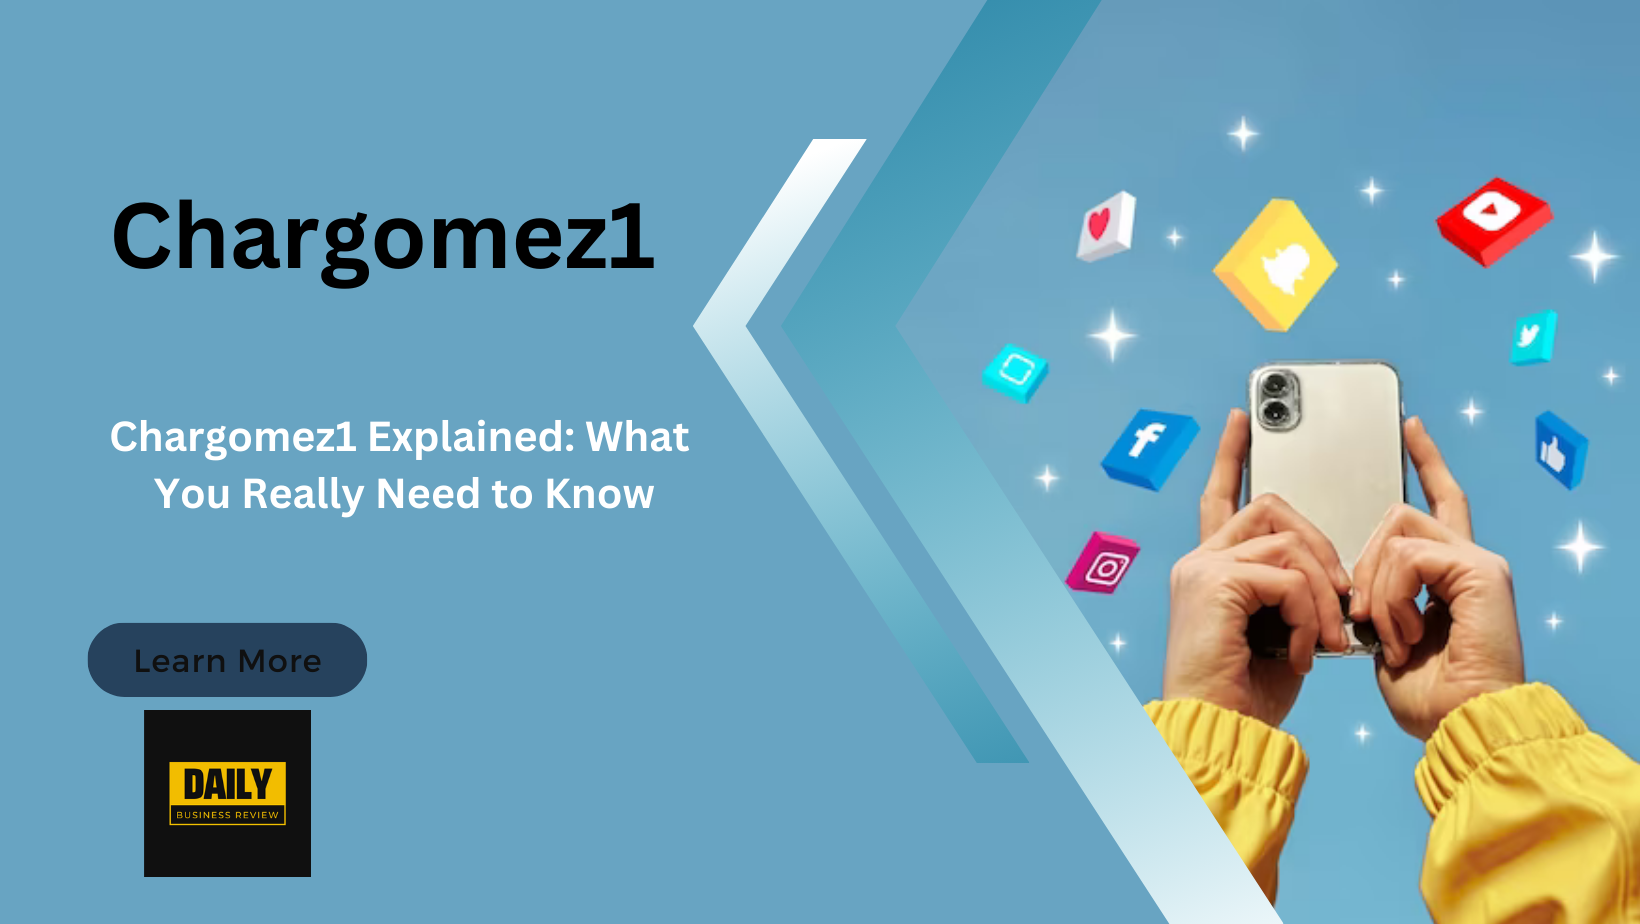 Chargomez1 Explained: What You Really Need to Know